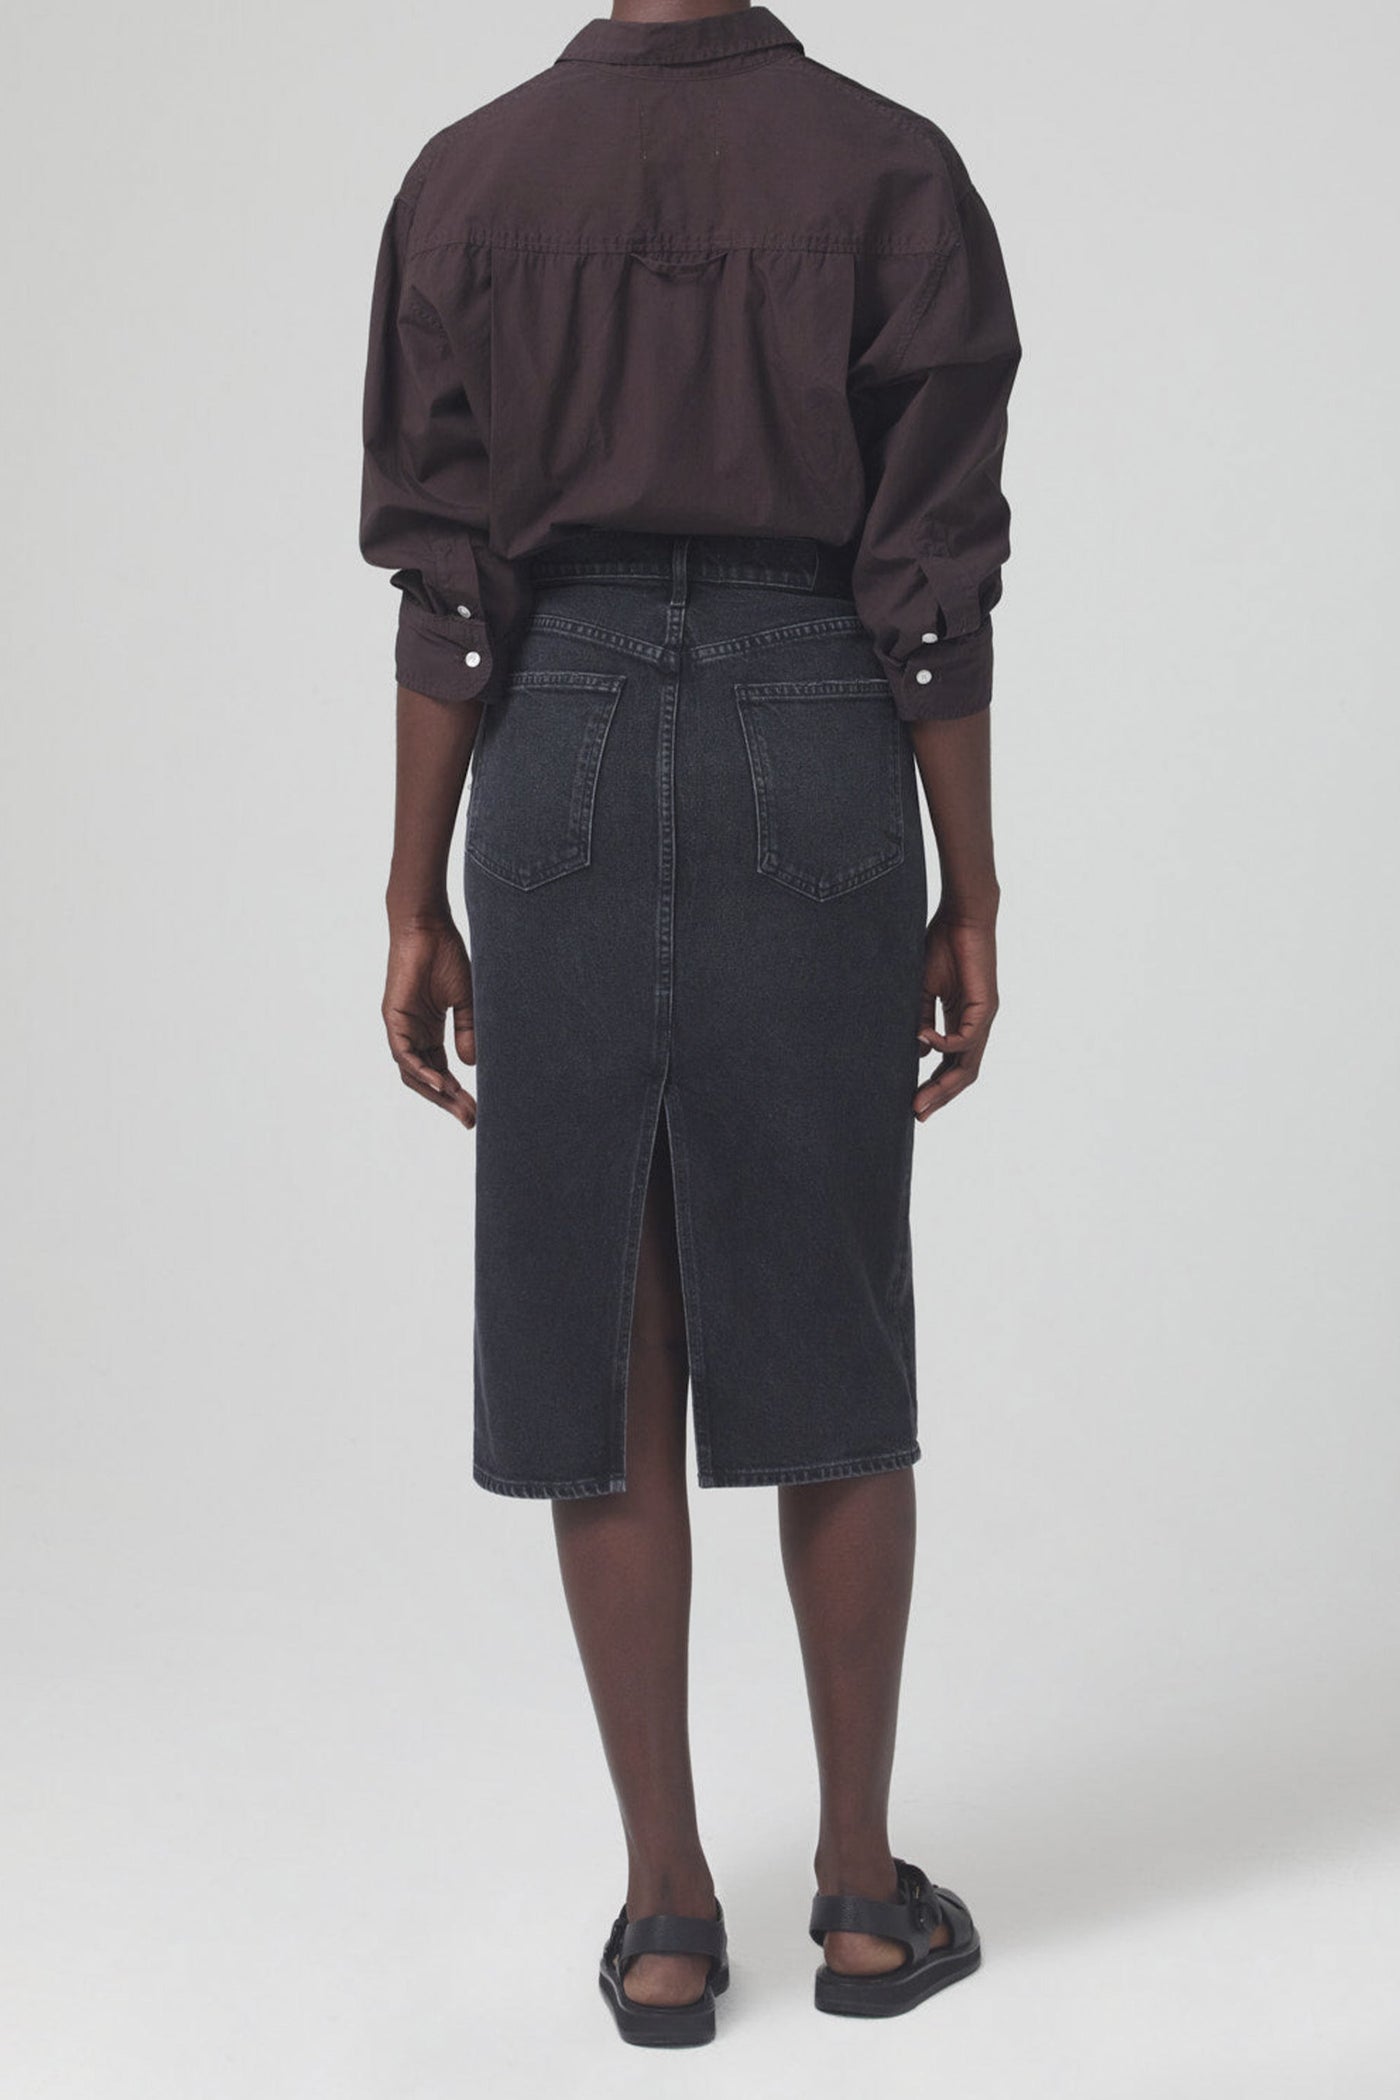 Citizens of Humanity Bea Skirt - Charcoal